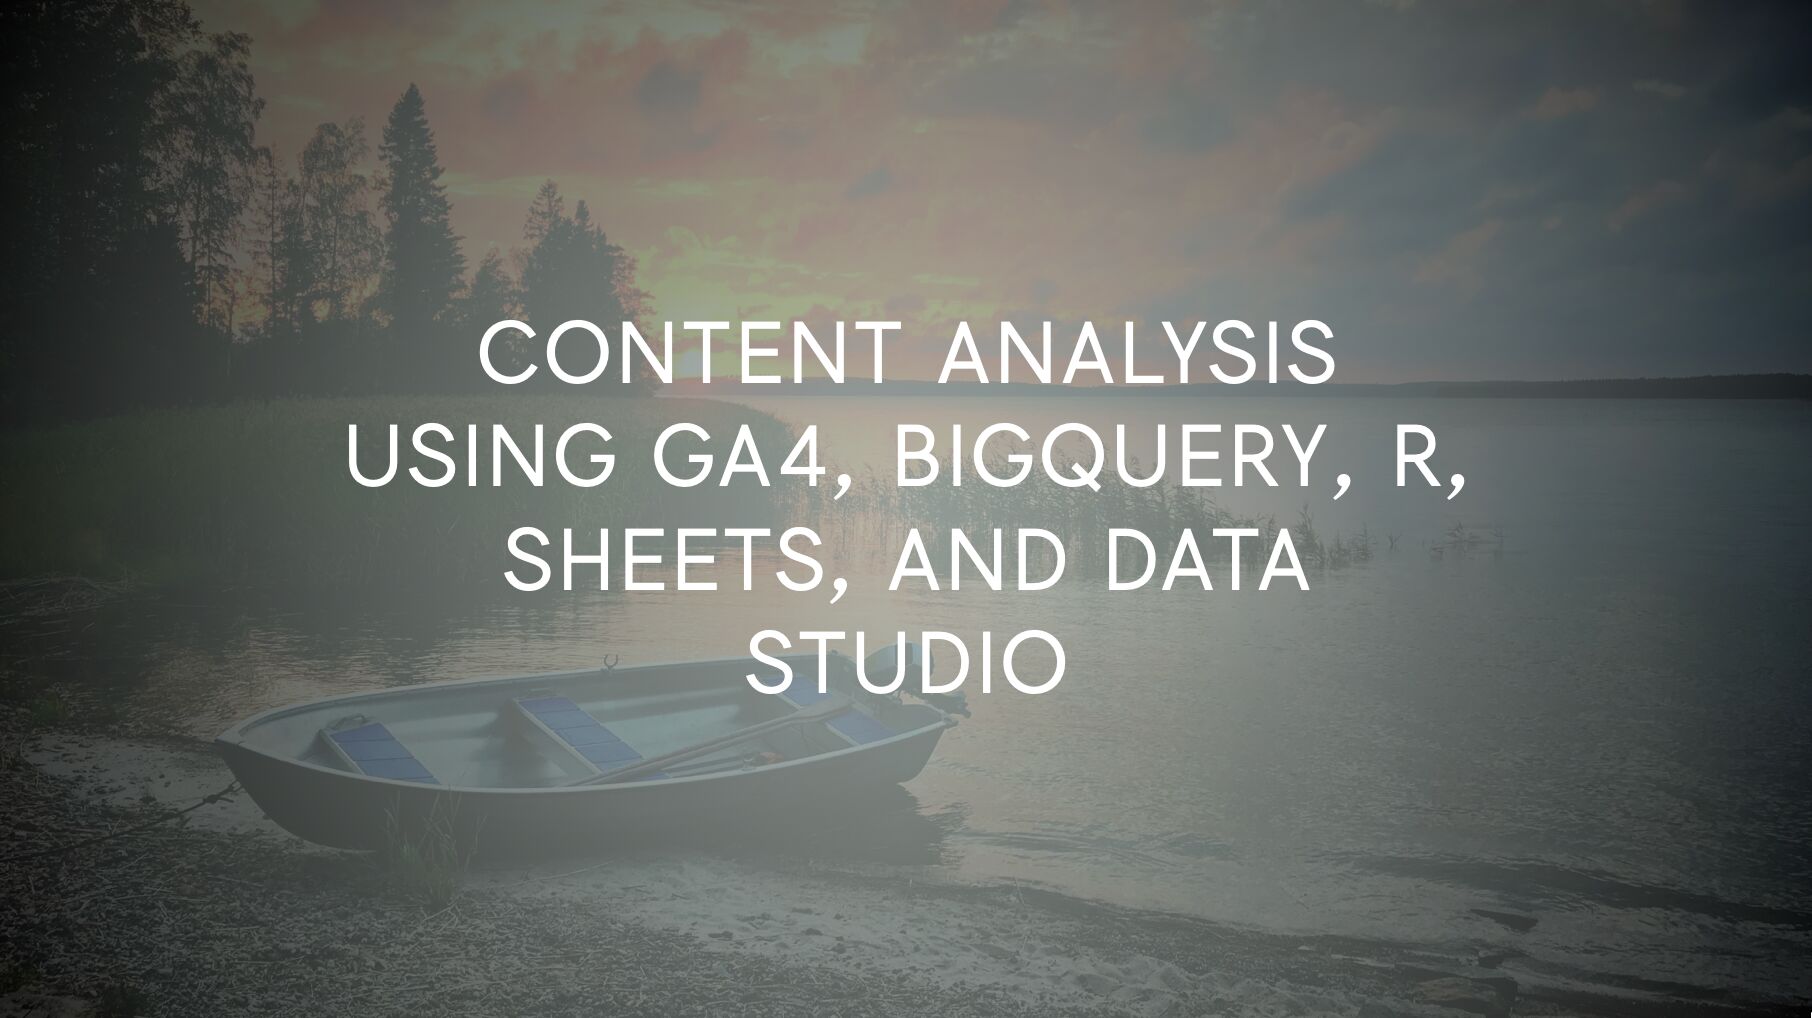 Content Analysis With GA4, BigQuery, R, Sheets, And Data Studio